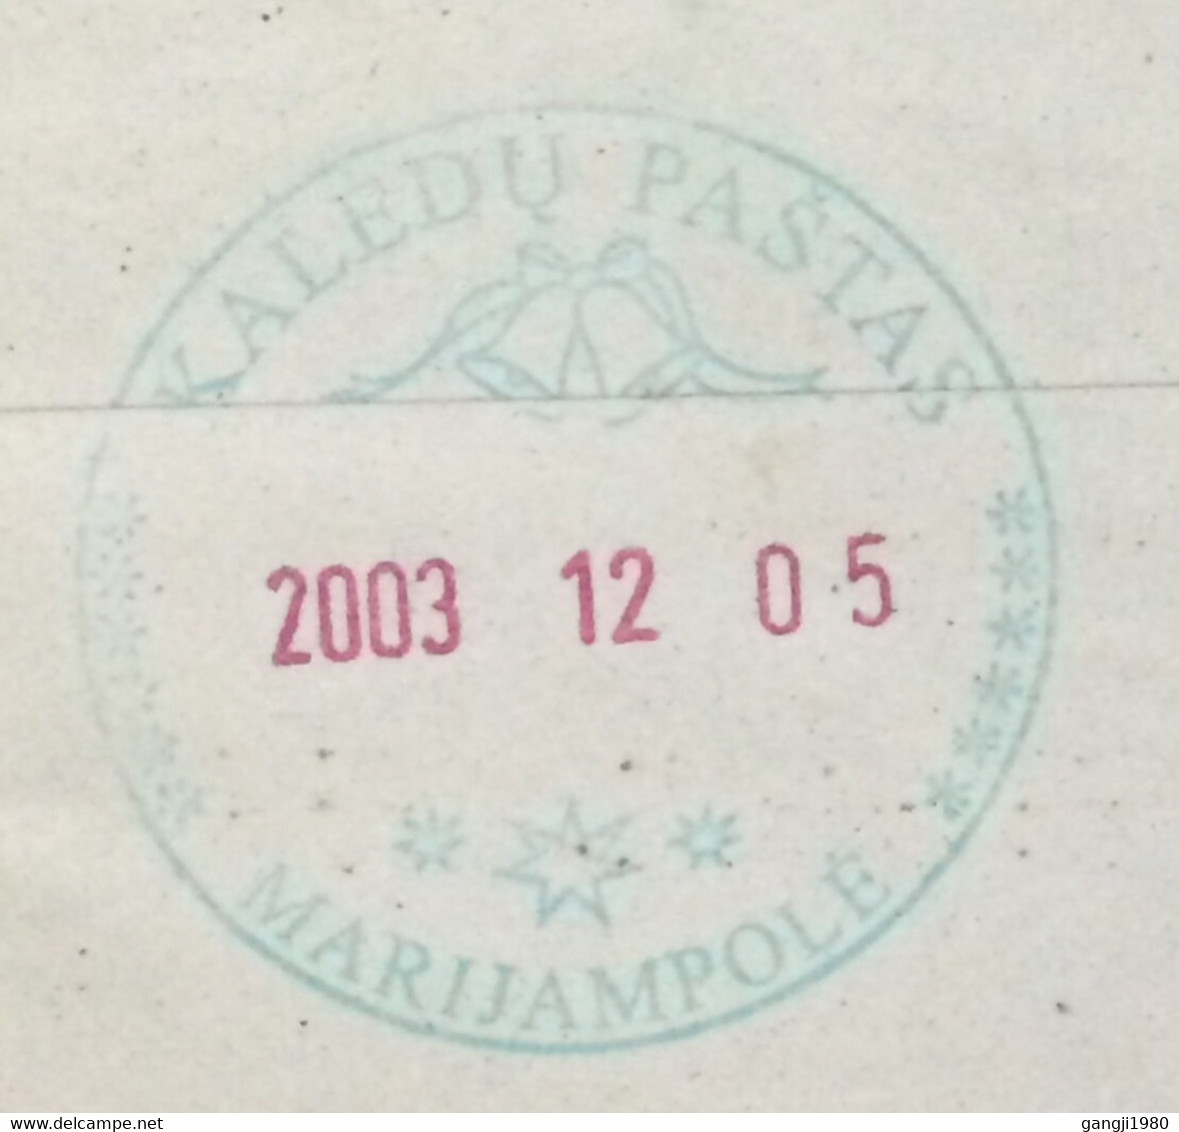 GREECE 2003, COVER USED TO LITHUANIA, OLYMPIC, POLE VAULT, GAME, SPORT, PATRAS  & MARIJAMPOLE CITY CANCEL - Covers & Documents